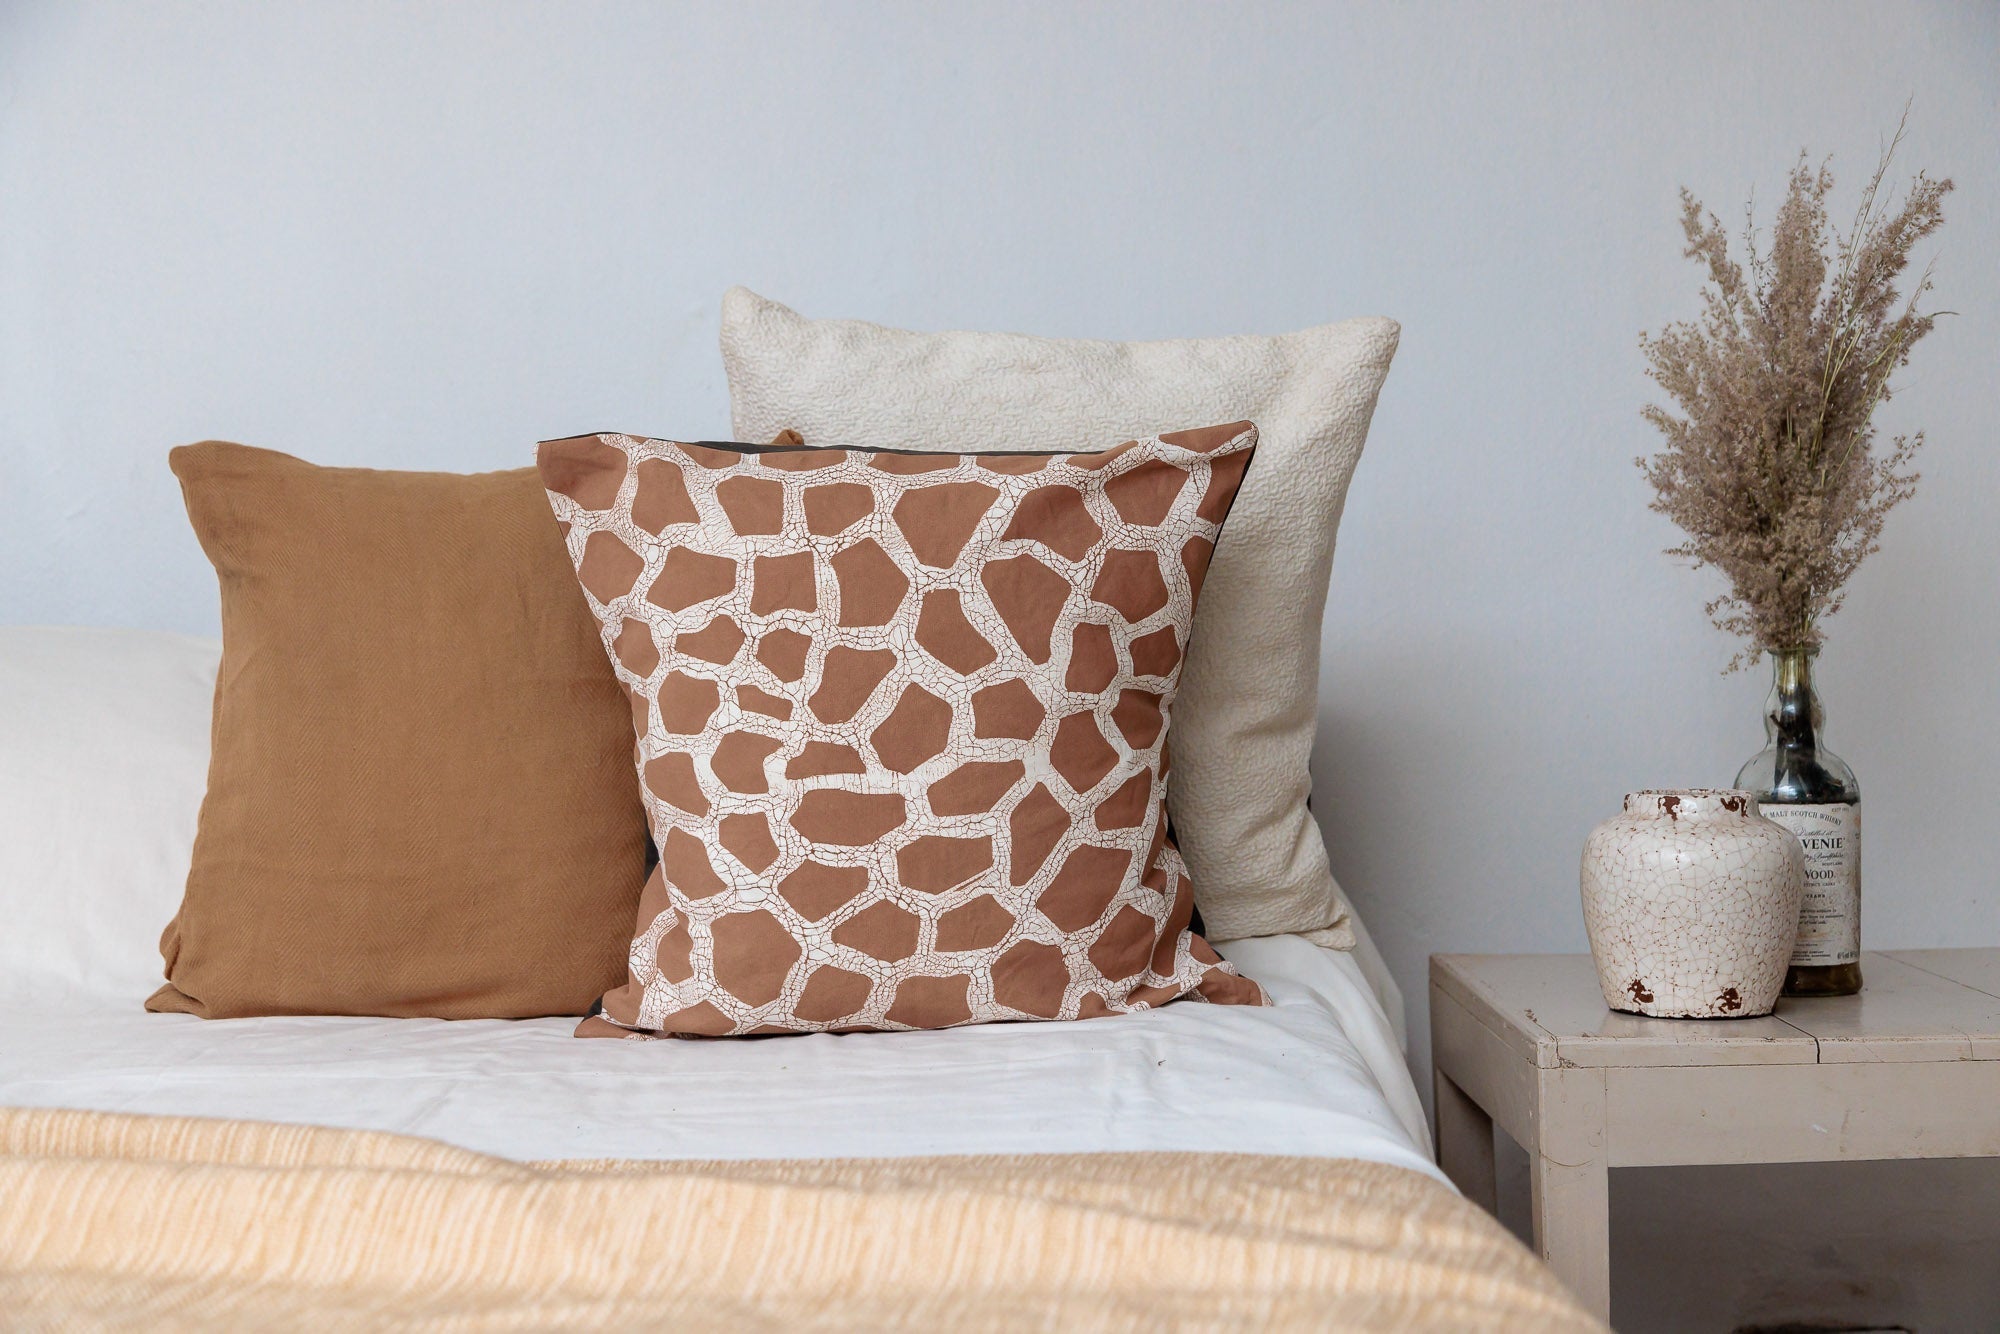 IMPERFECT SALE : Mkupo Giraffe Cushion Cover Small - Hand Painted by TRIBAL TEXTILES - Handcrafted Home Decor Interiors - African Made